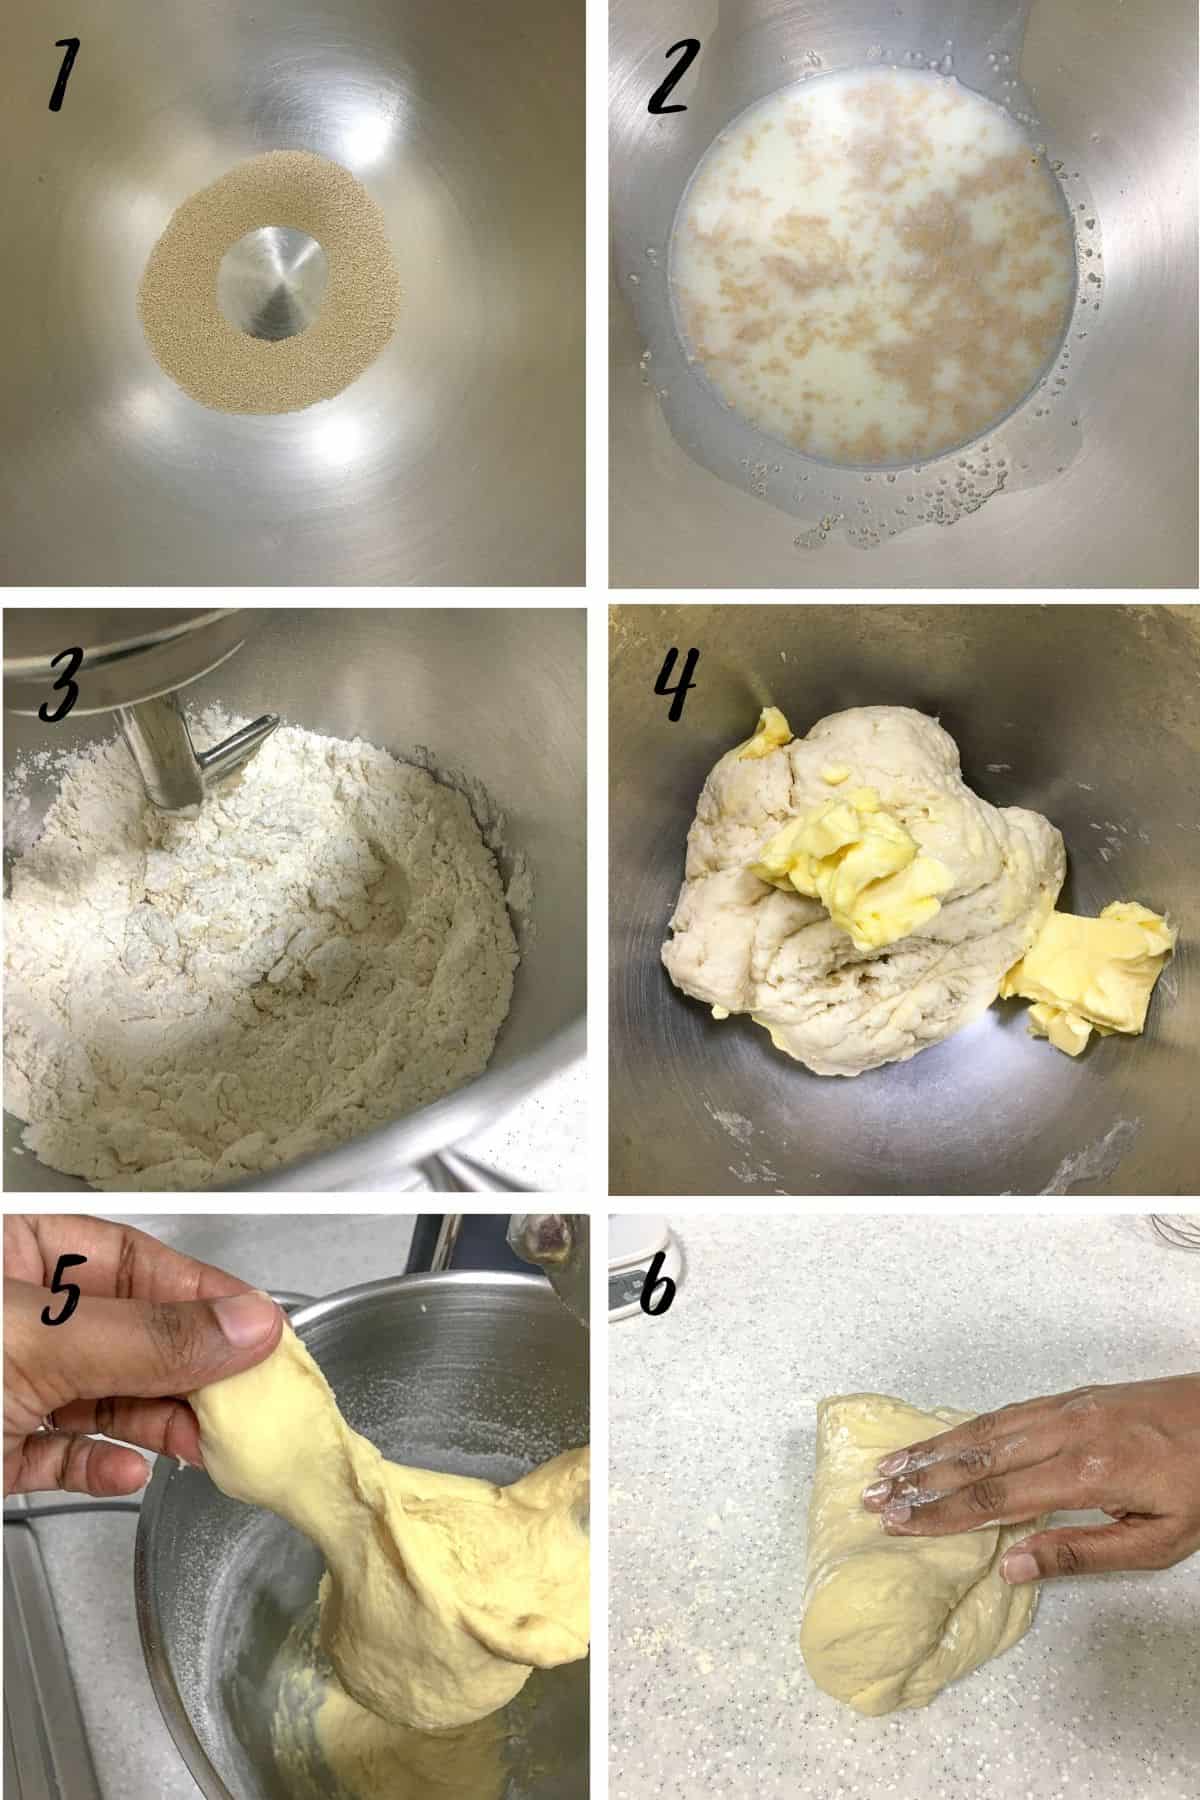 A poster of 6 images showing how to mix the dough for easy yeast rolls.